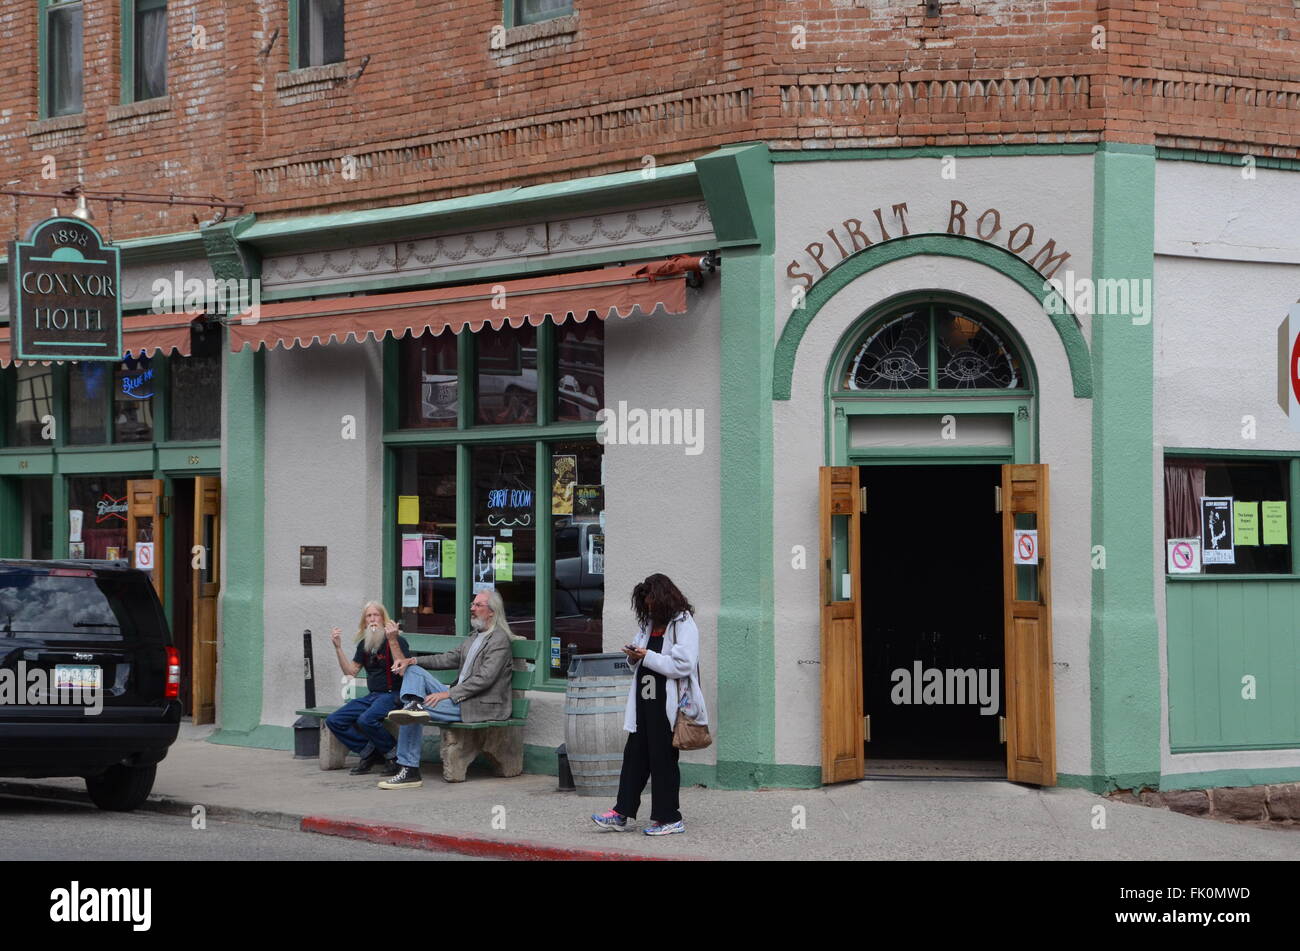 jerome ghost town arizona connor hotel ex brothel old hippies on bench outside bar Stock Photo